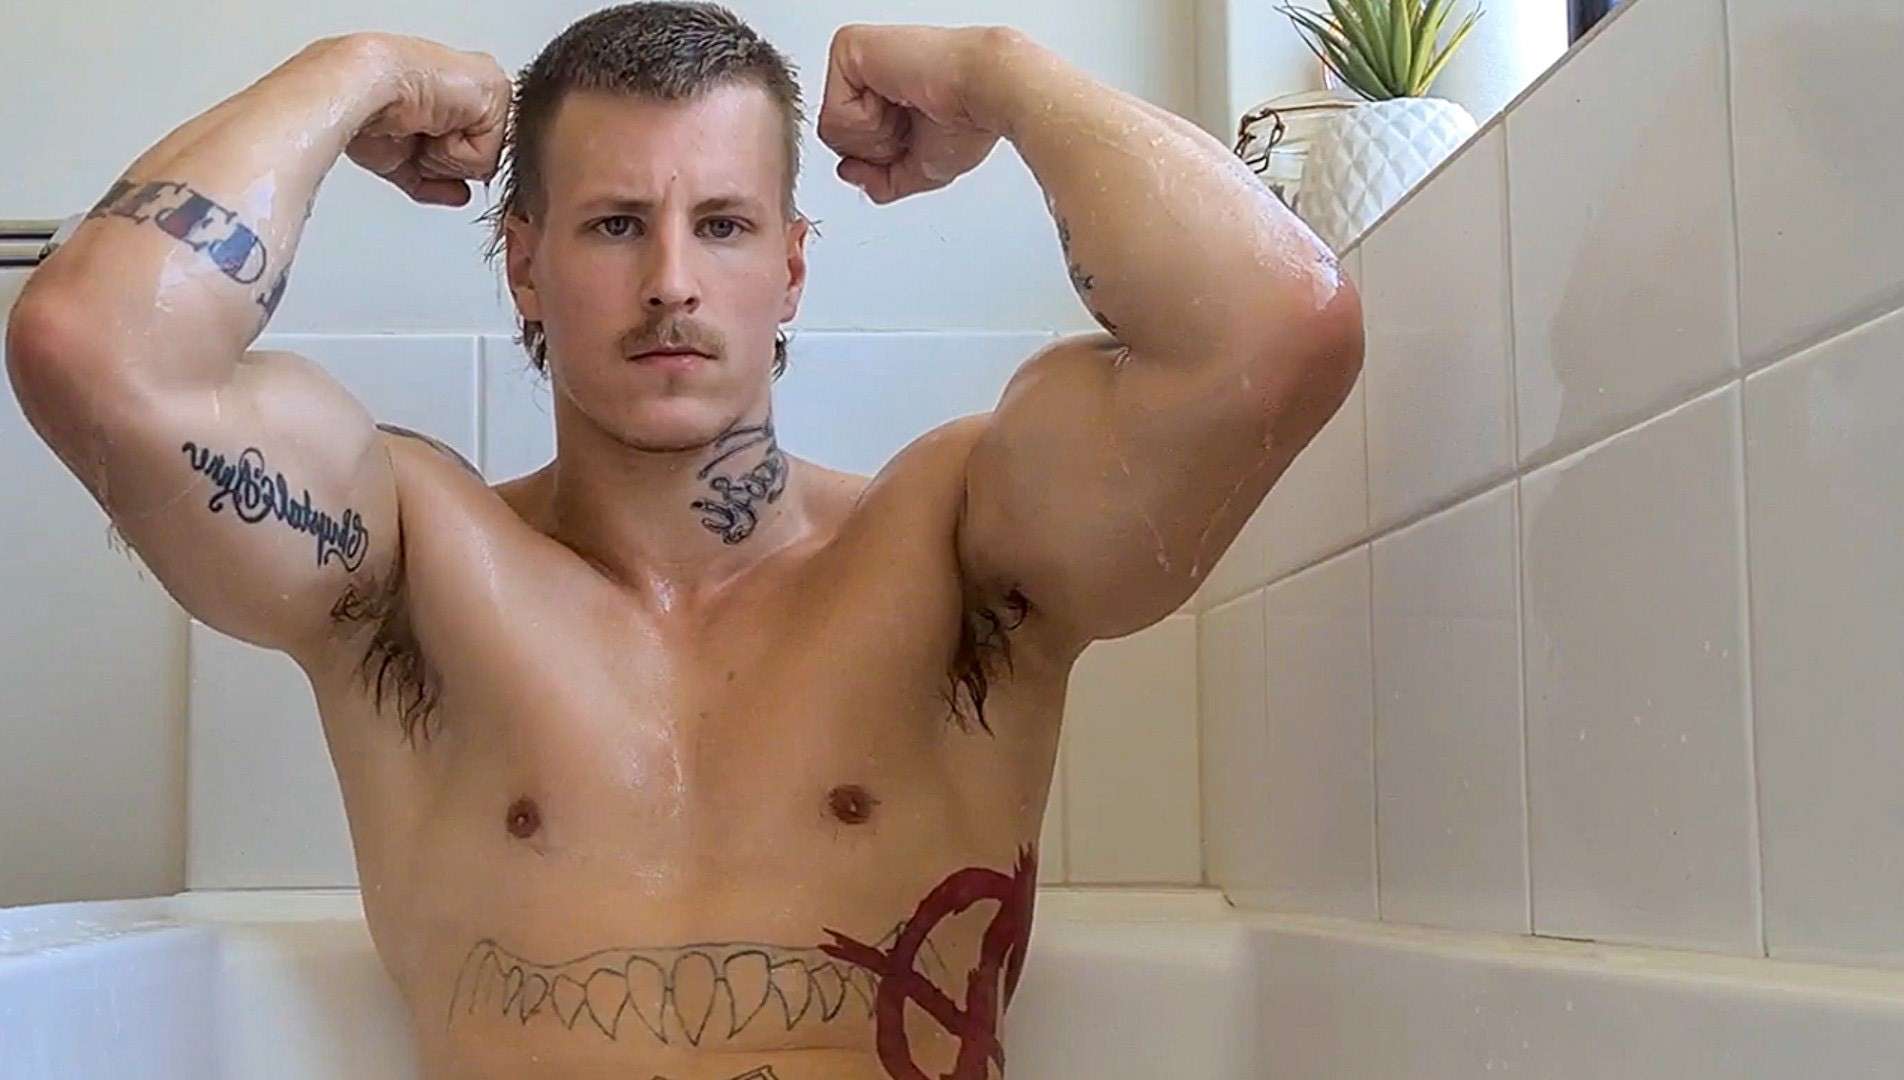 Alec Nysten turned to an OnlyFans explicit porn account to provide a family income, but image theft now threatens to ruin it photo